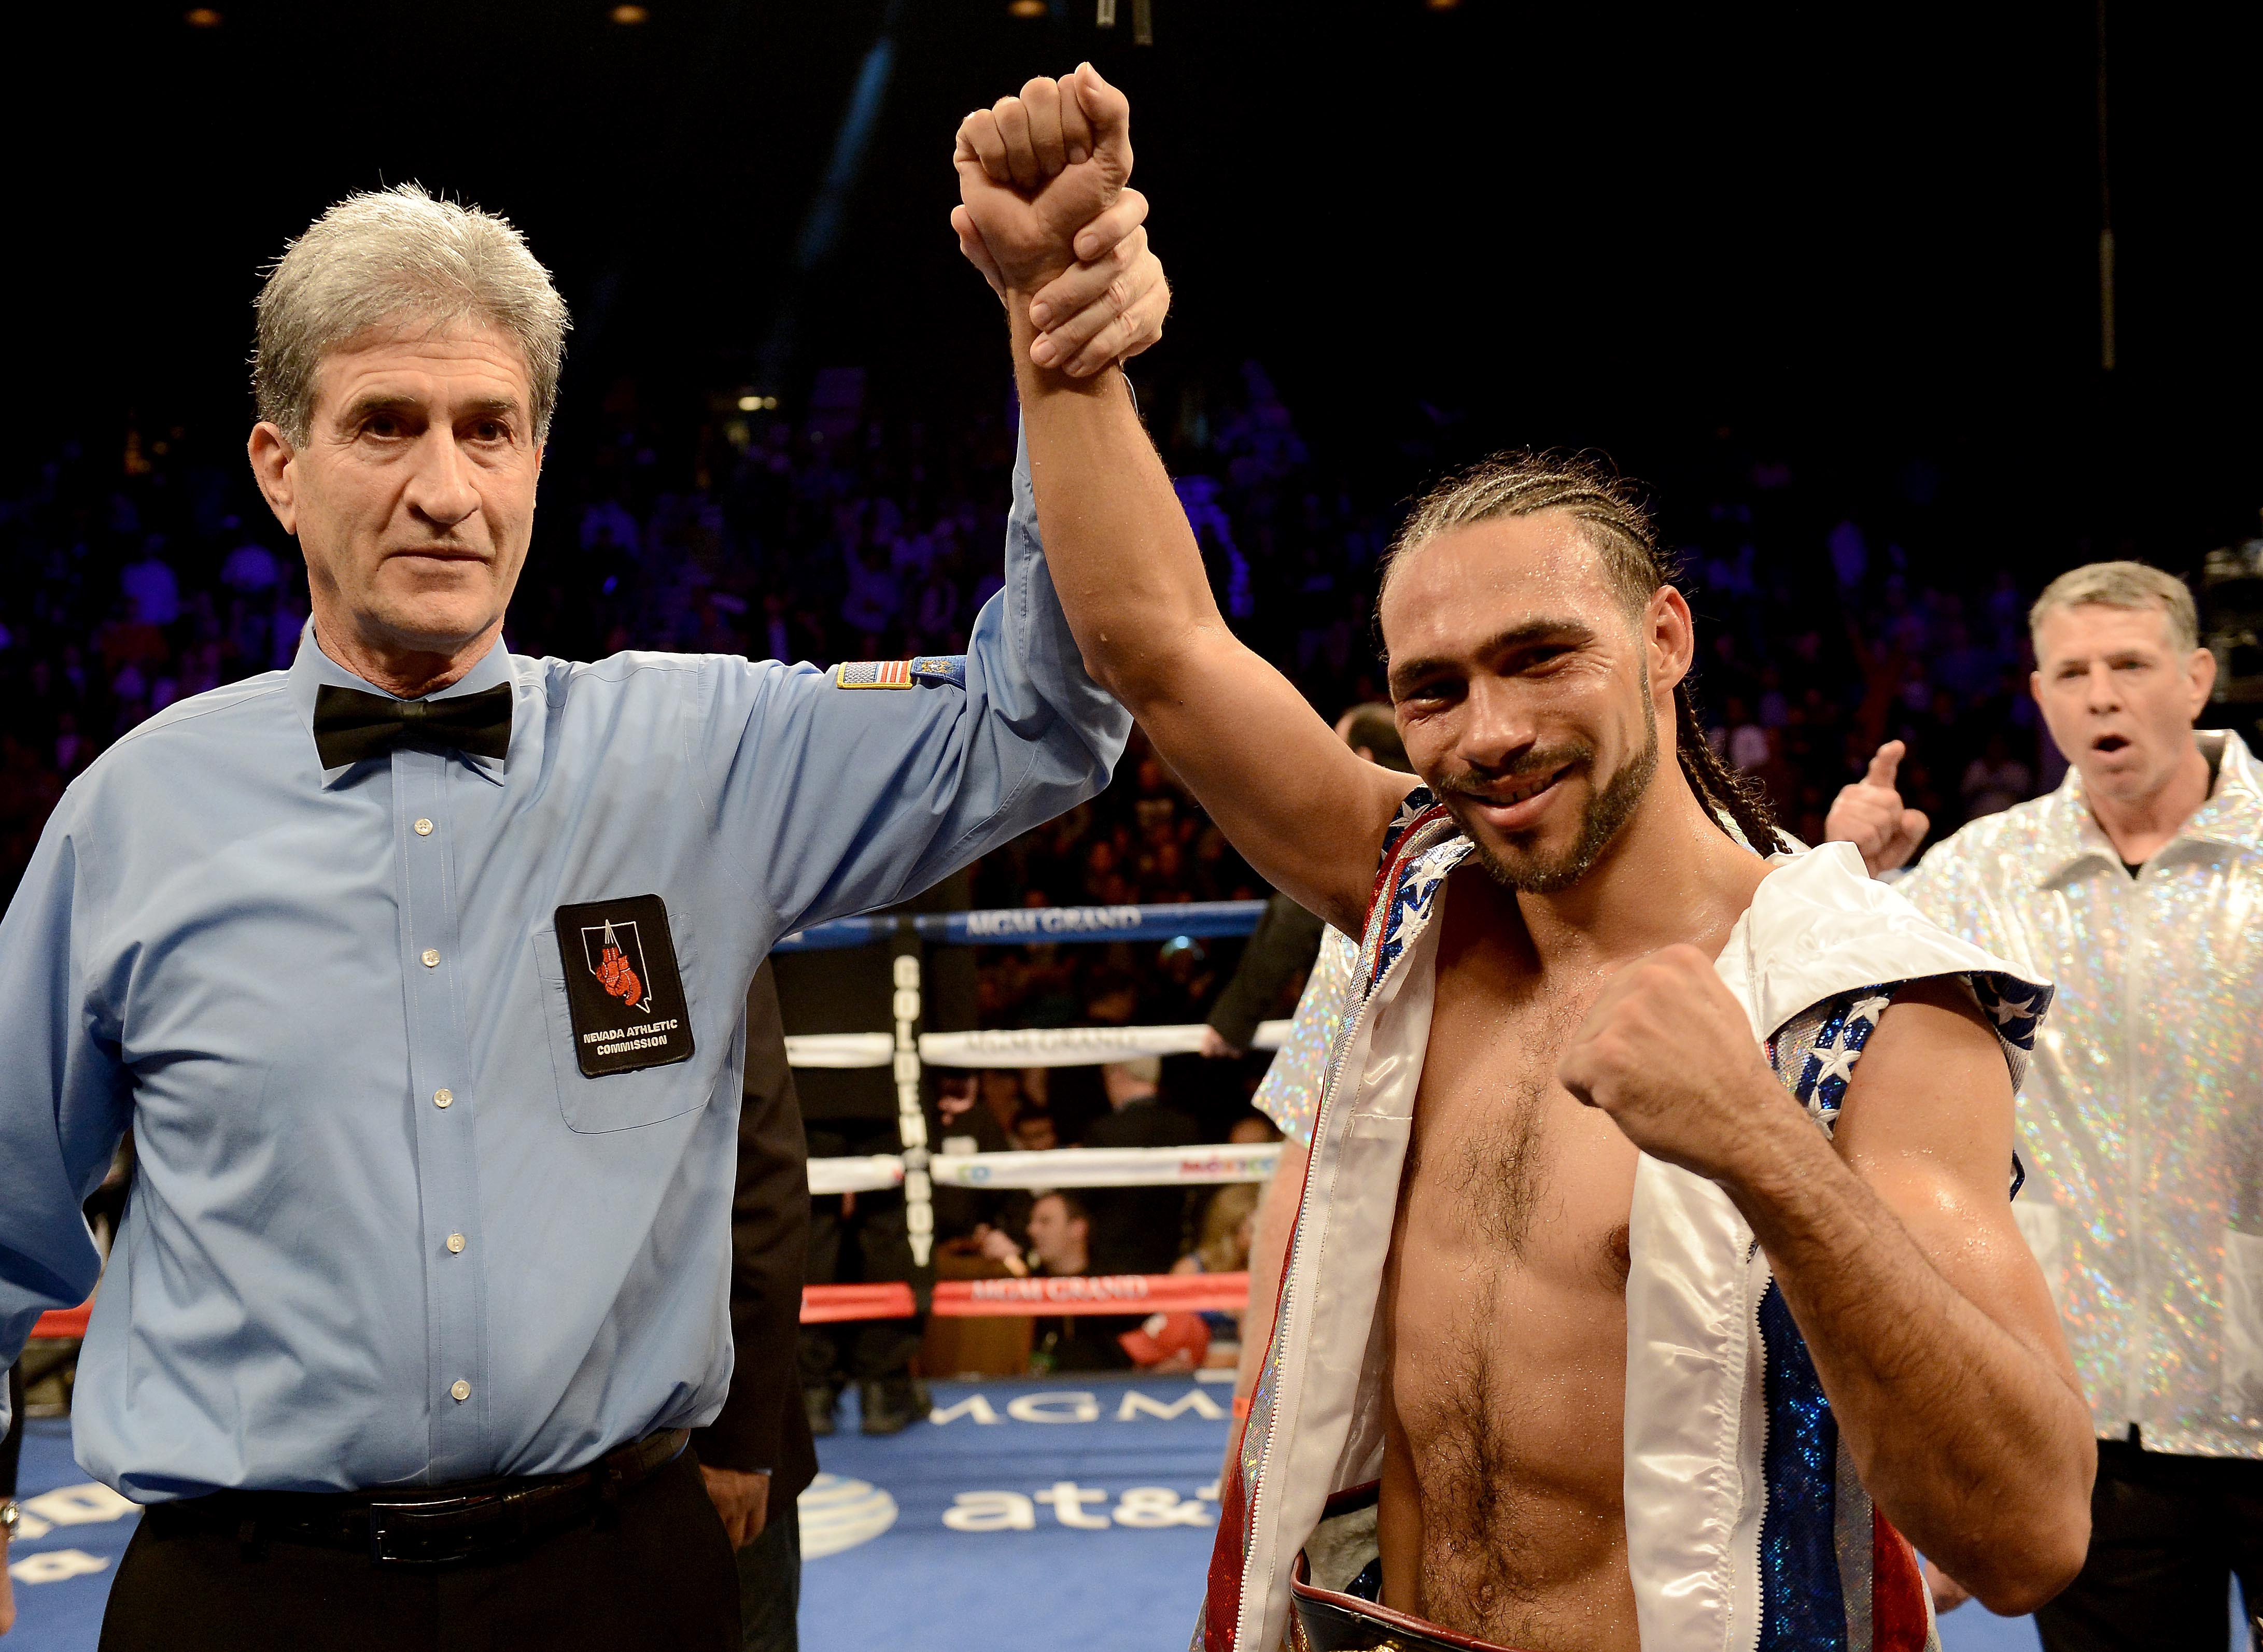 Thurman celebrates his win over Leonard Bundu. (Photo by Donald Miralle/Getty Images)